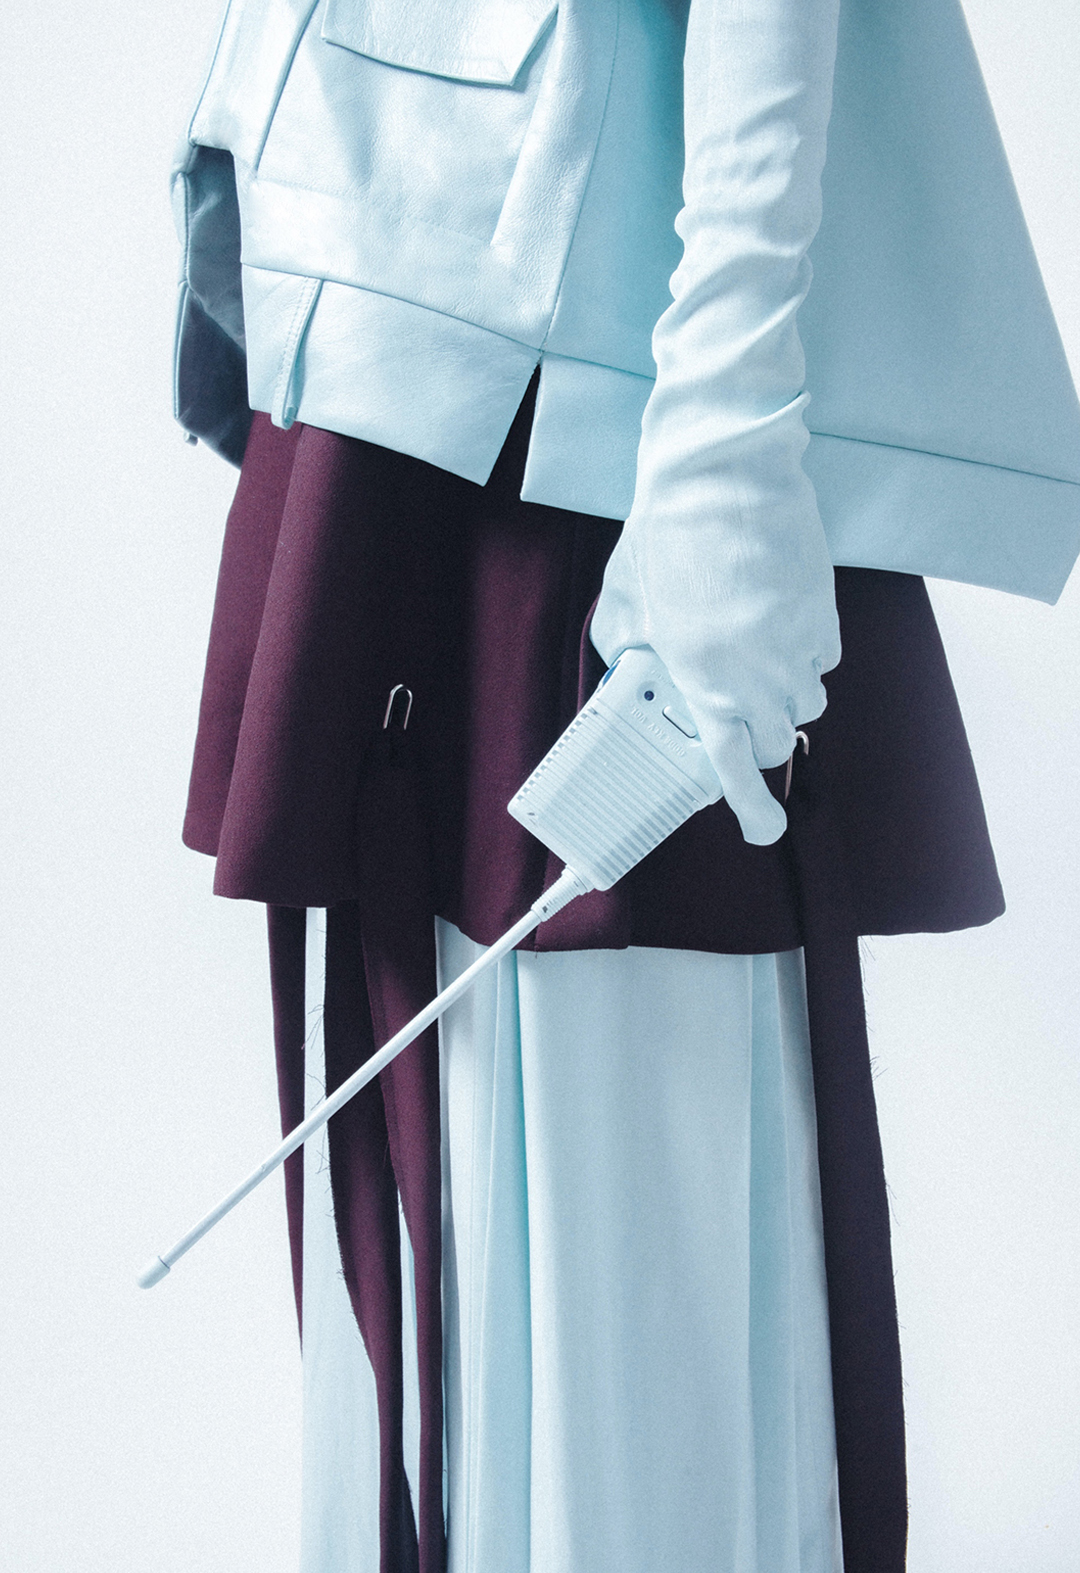 Detail view of look 2, showing a baby-blue, double-collar leather shirt jacket with trapunto details and a back opening, a baby-blue double-pleated skirt, and a dark-purple grommet apron skirt.